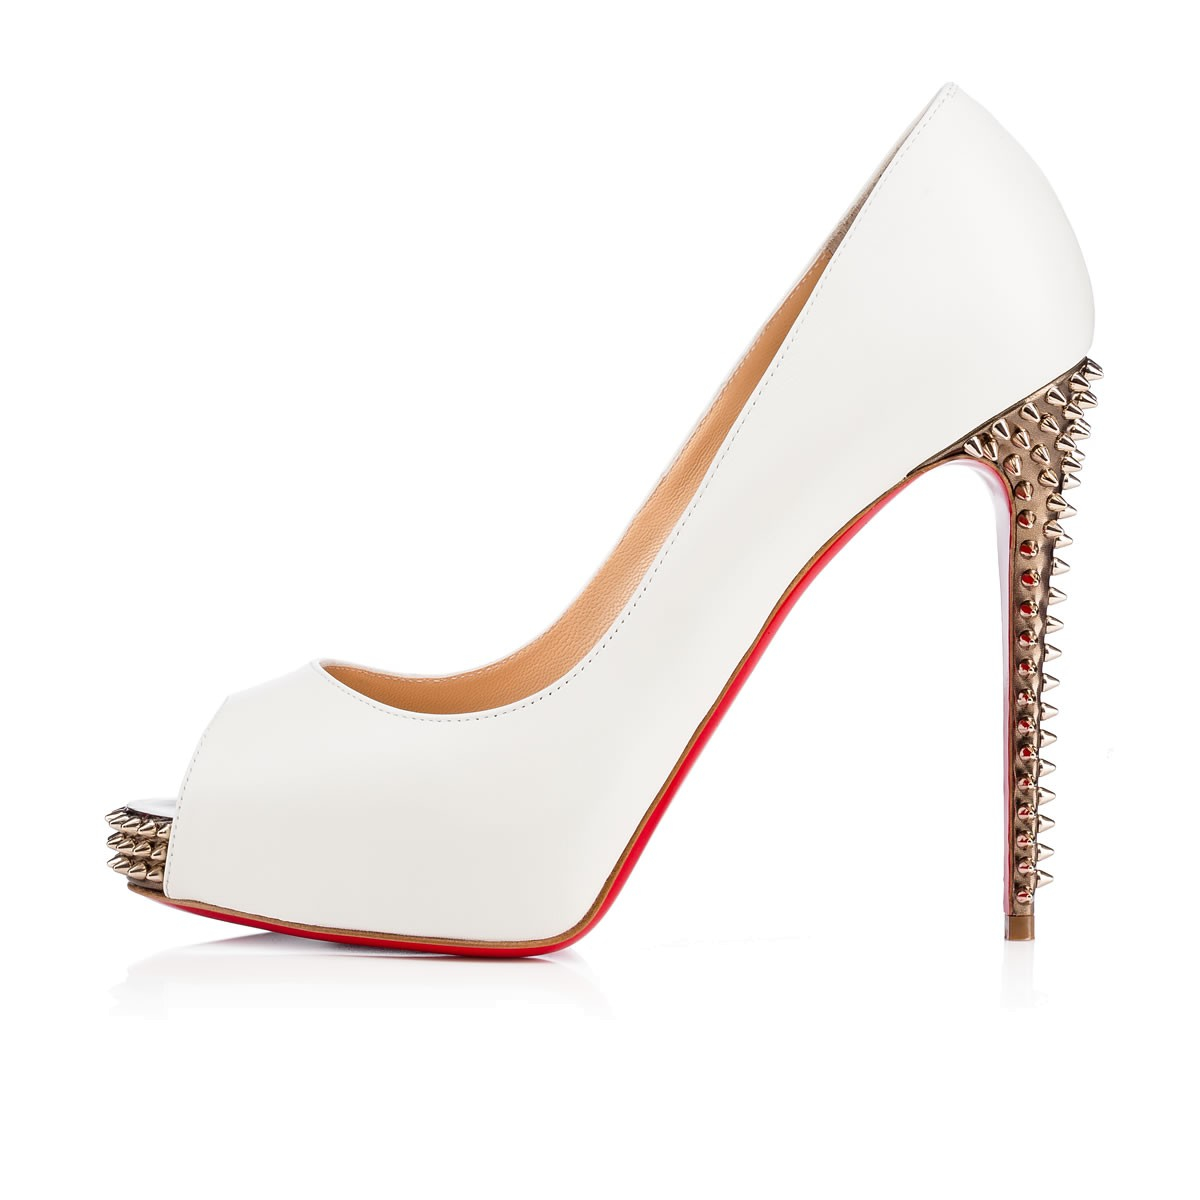 Christian louboutin Very Priv Studded Leather Pumps in White | Lyst  